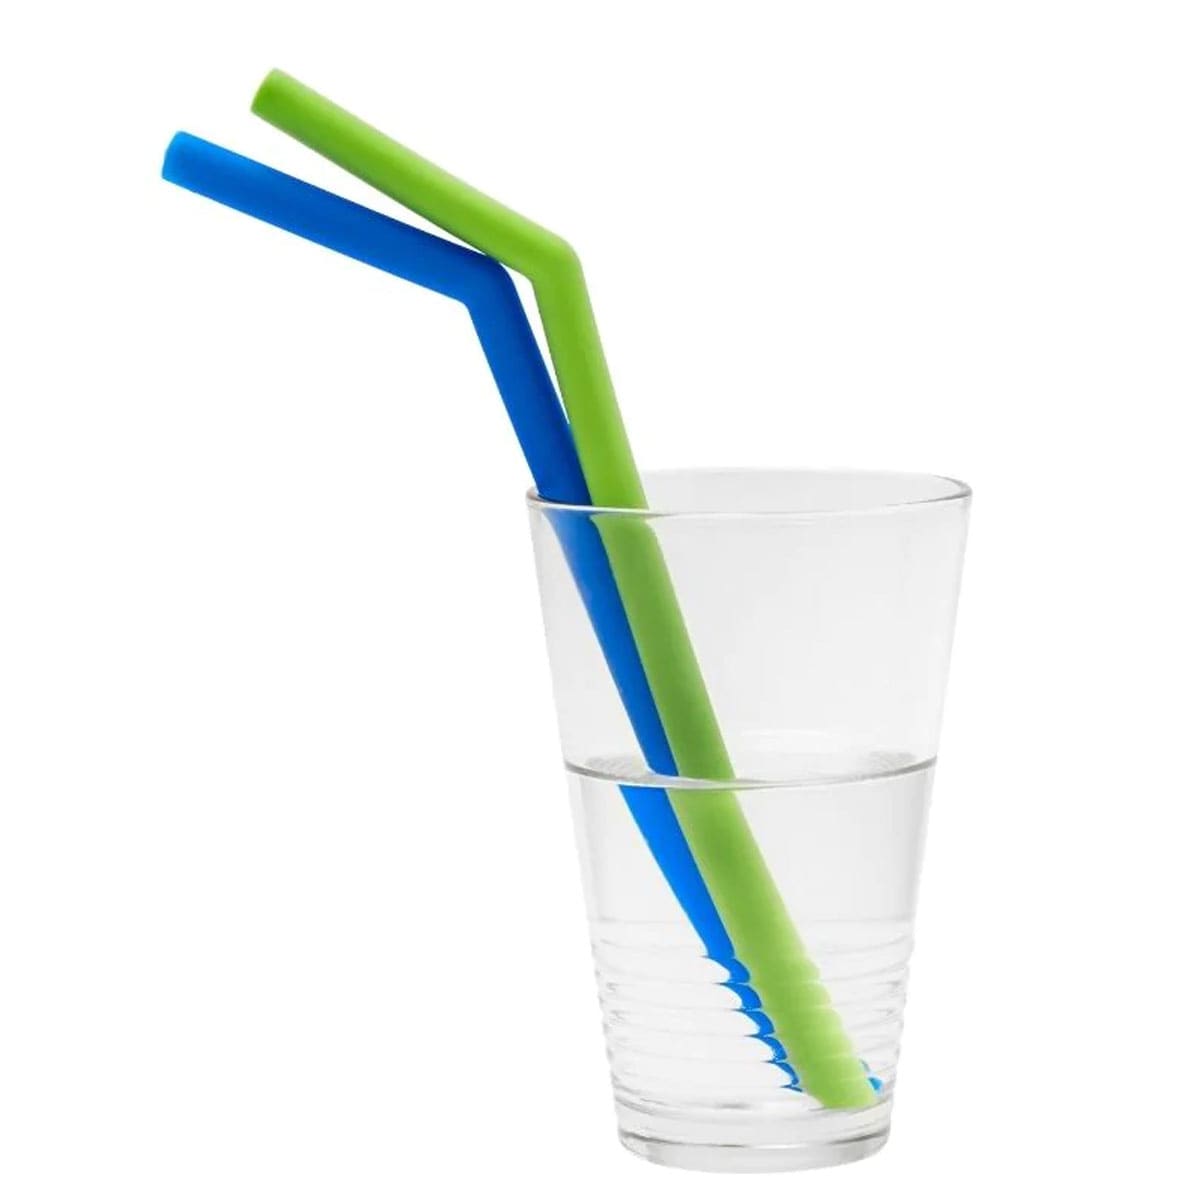 Little Mashies Reusable Soft Silicone Blue & Green Straws + Cleaning Brush